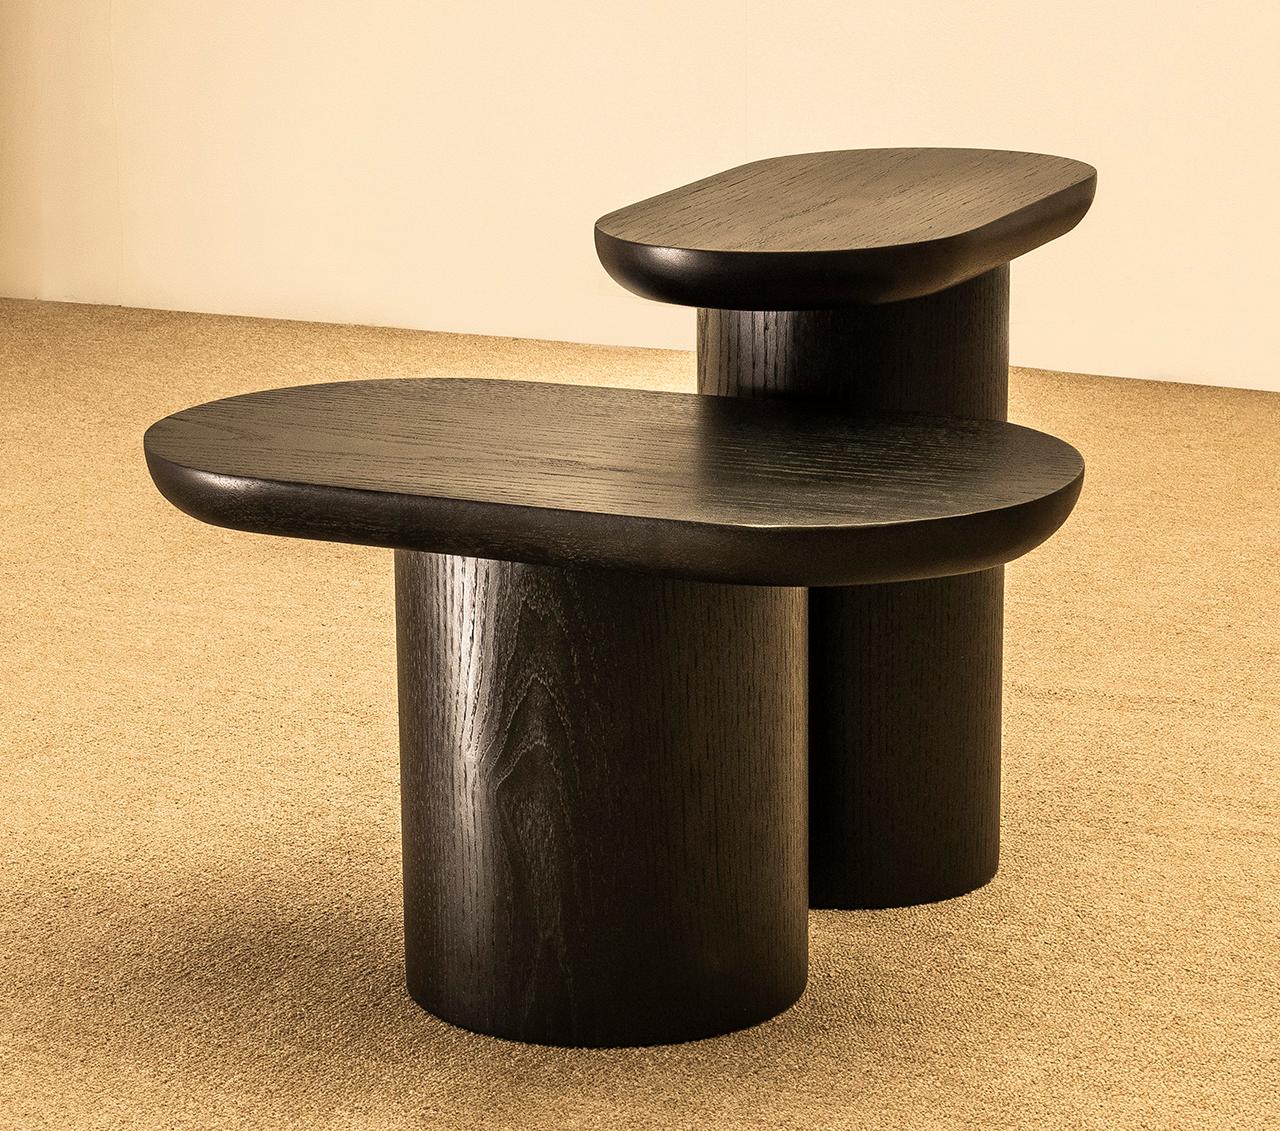 Set composed of two Porto side tables, a high and a low.
Dimensions: High table L 45/ W 25/ H 45 cm - Low table L 60/ W 32/ H 34 cm 

Porto low tables are composed of a circular top that seems to rest on a sturdy oblong base. Lightness and weight